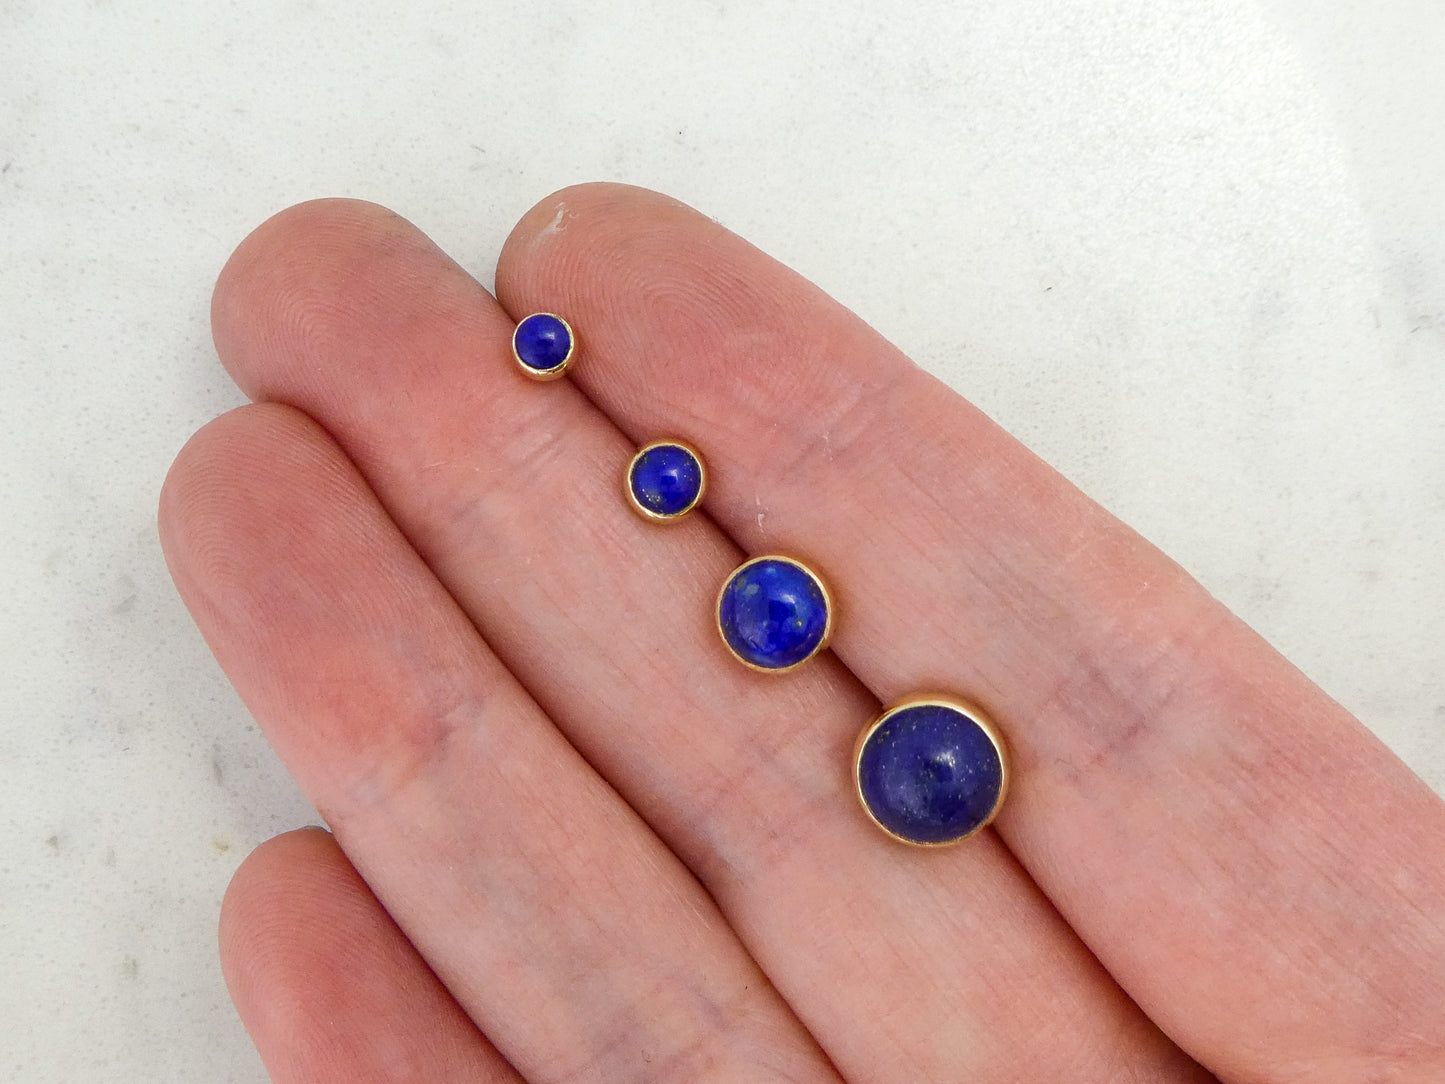 Lapis Lazuli Gold Stud Earrings - 8mm solid 14k gold settings, posts and backs